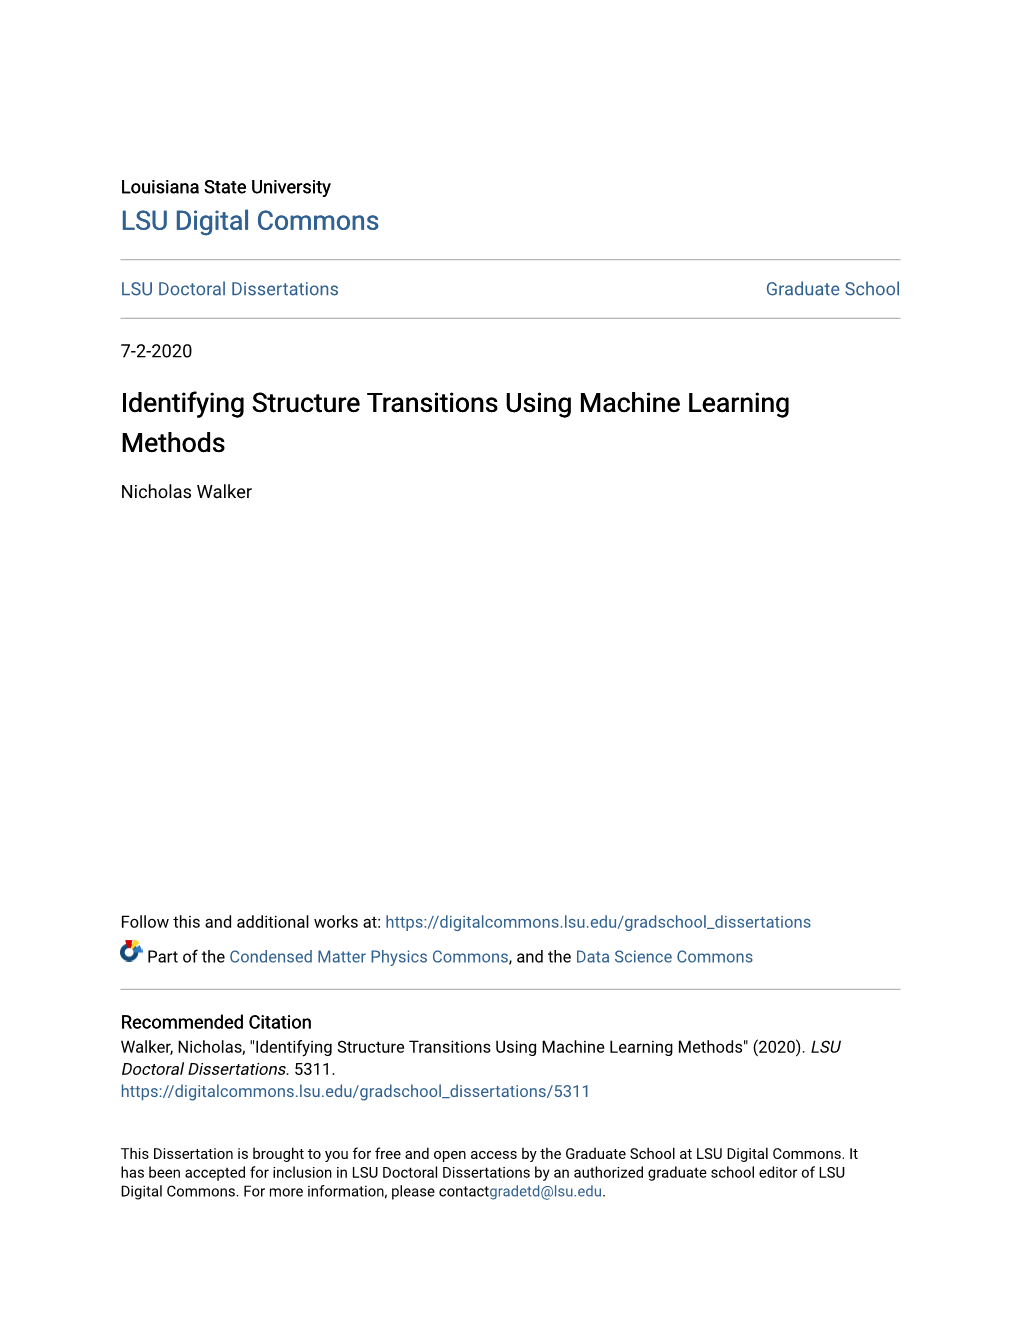 Identifying Structure Transitions Using Machine Learning Methods